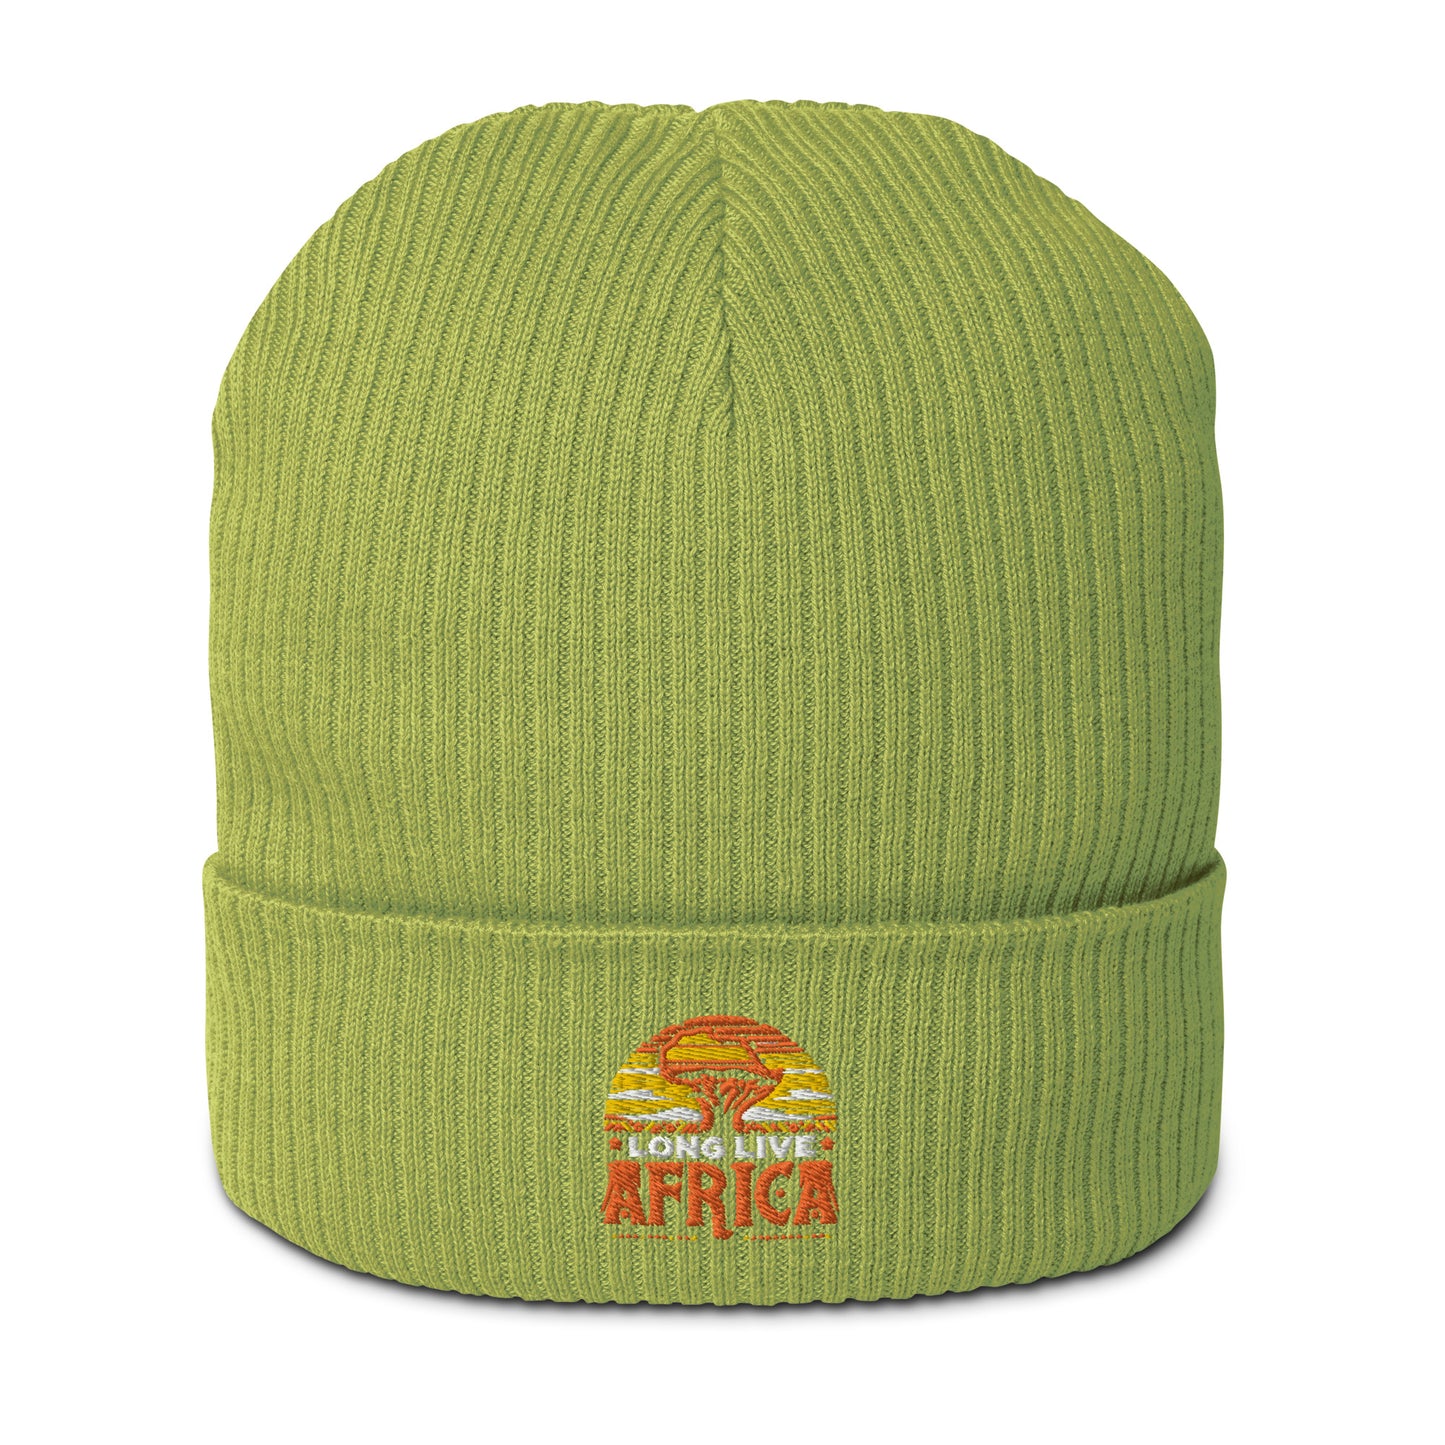 LONG LIVE AFRICA - Organic ribbed beanie